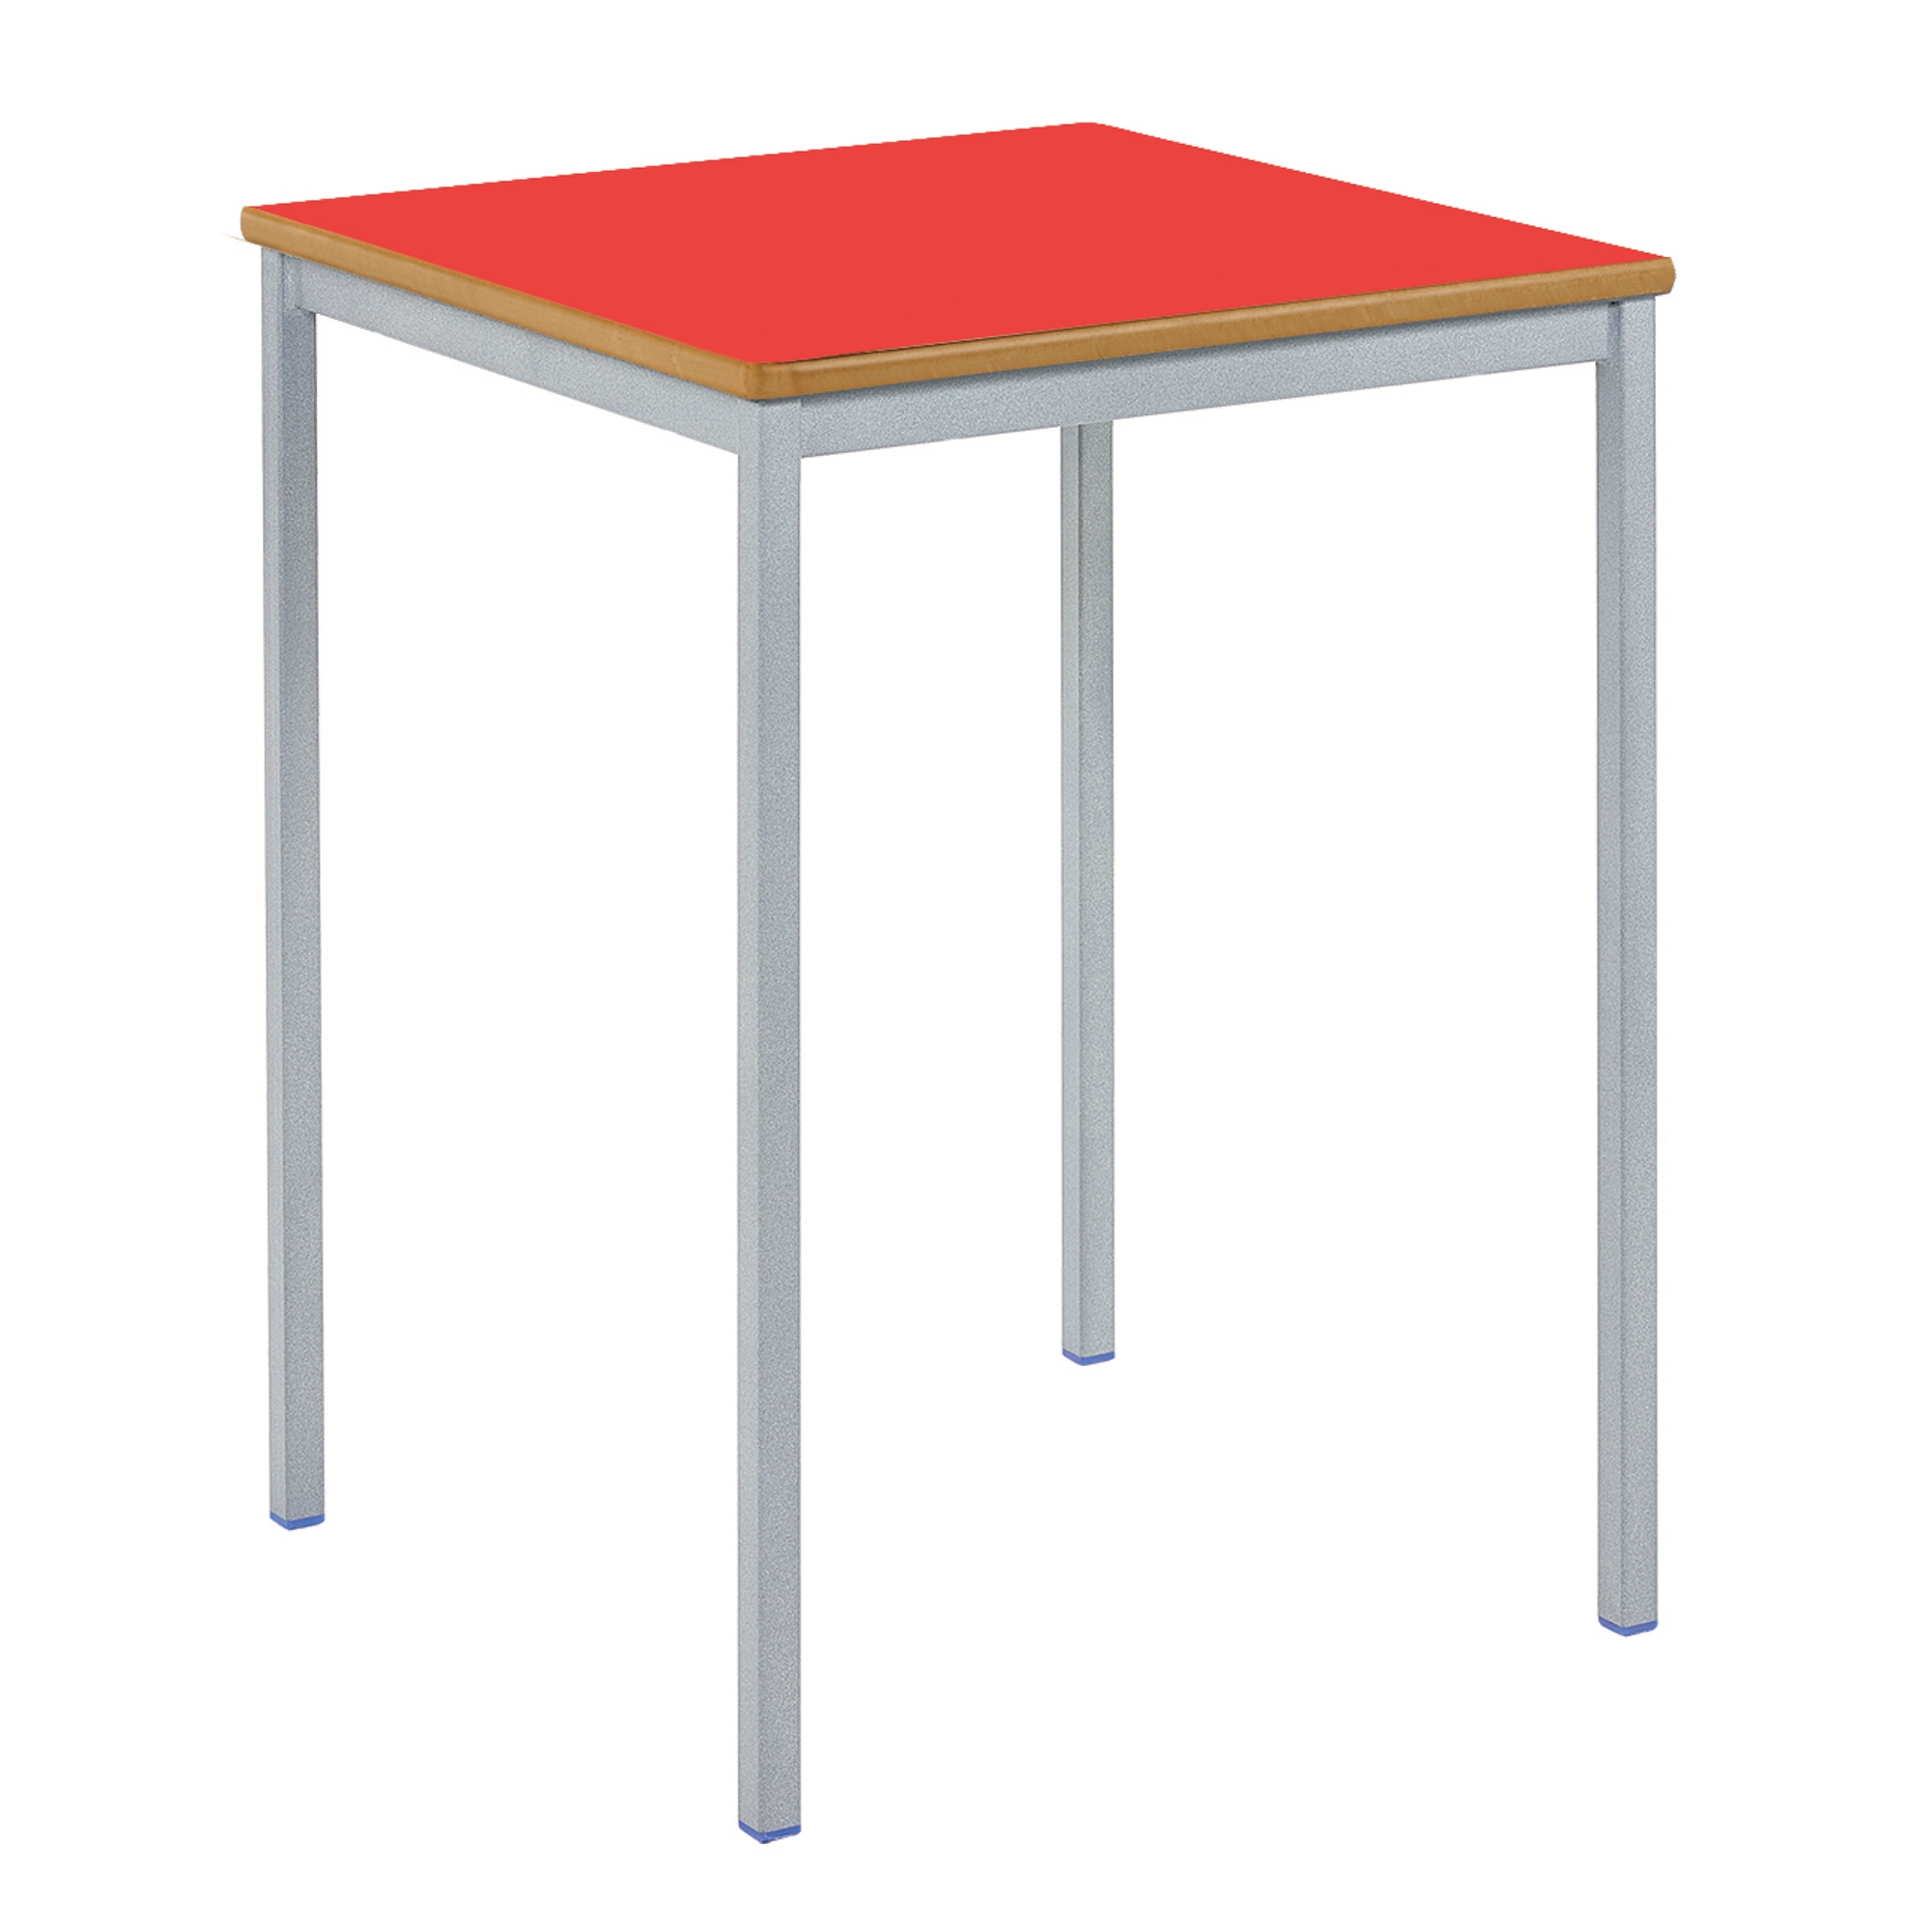 Classmates Square Fully Welded Classroom Table - 600 x 600 x 710mm - Red